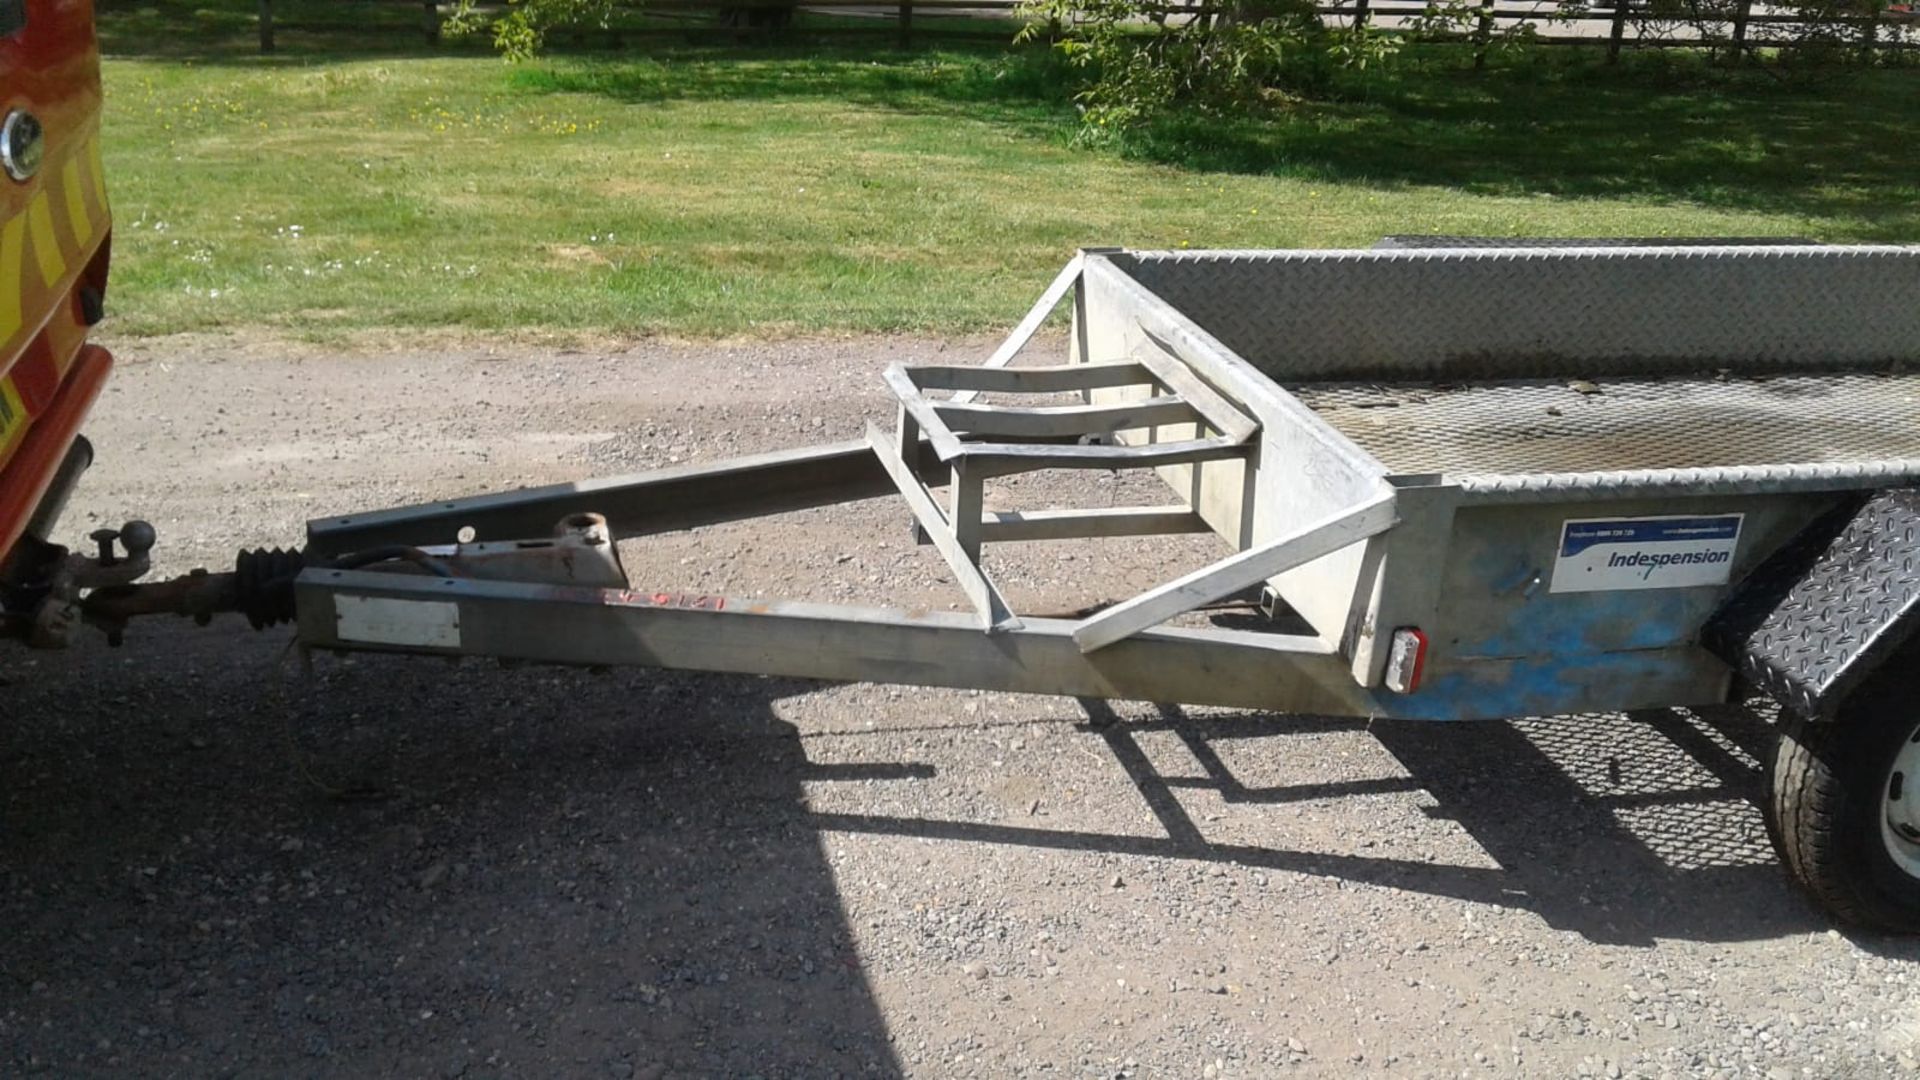 INDESPENSION TWIN AXLE TOW-ABLE PLANT TRAILER, 4 X EXCELLENT TYRES, TOWS WELL, 1400KG EACH AXLE - Image 5 of 9